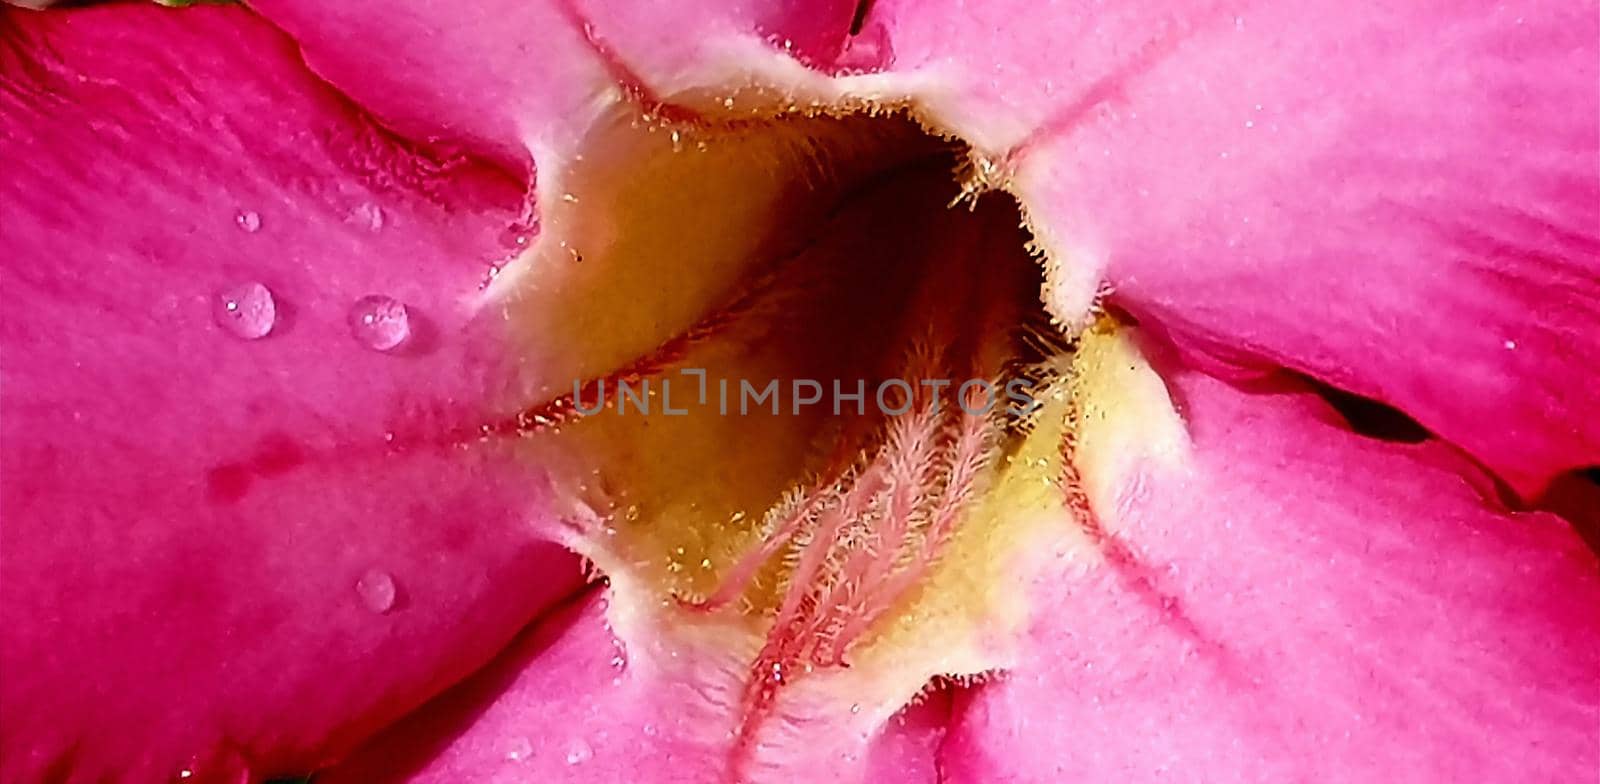 Beautiful close up of pink flower (Pink allamanda or Allamanda blanchetii A.DC, or Apocynaceae) with drops of fresh dew in the morning